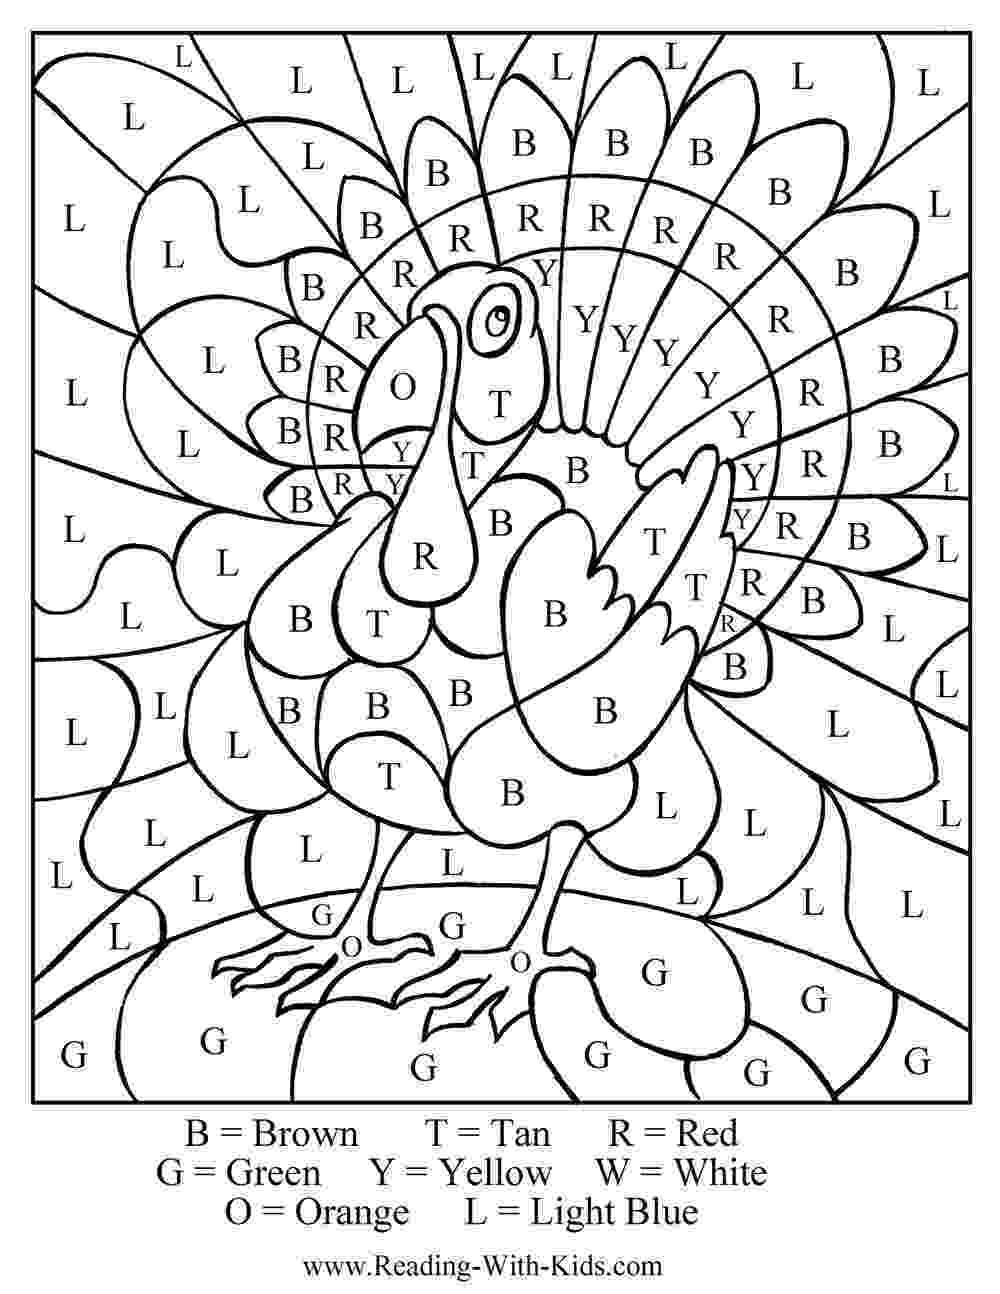 printable coloring pages thanksgiving free printable thanksgiving coloring pages for kids cool2bkids pages thanksgiving printable coloring free 